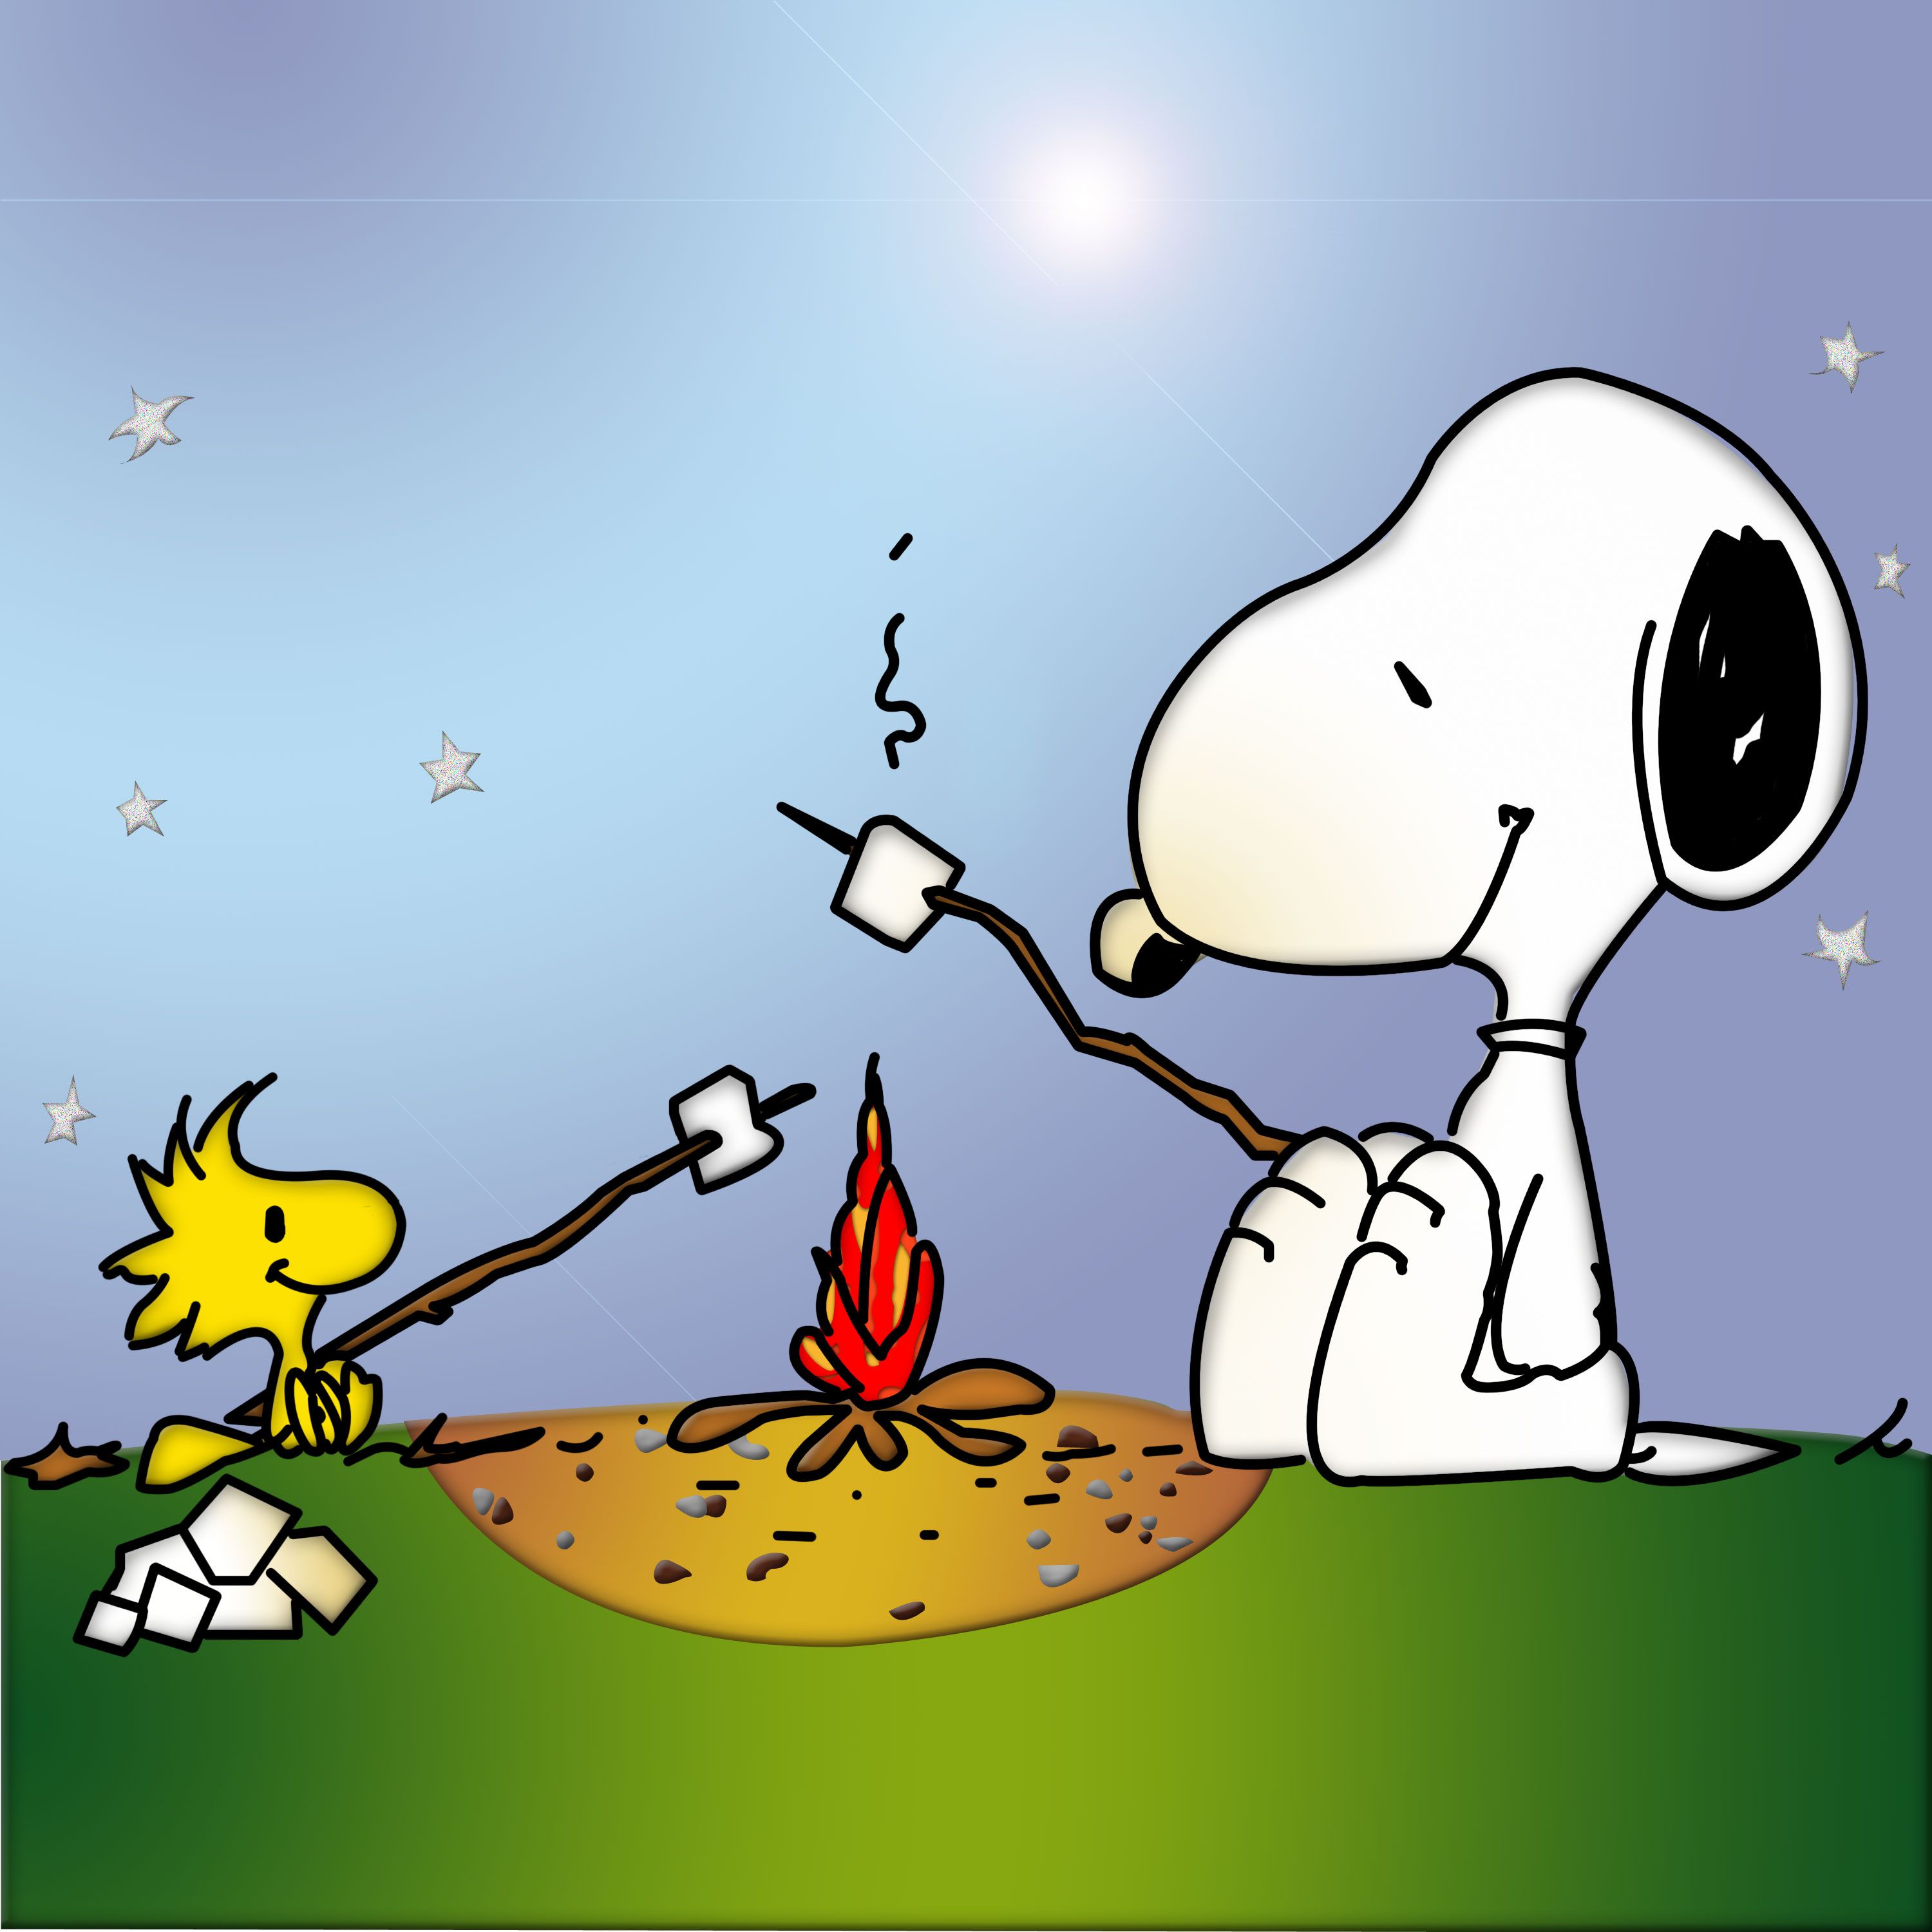 Snoopy pictures, Snoopy wallpapers